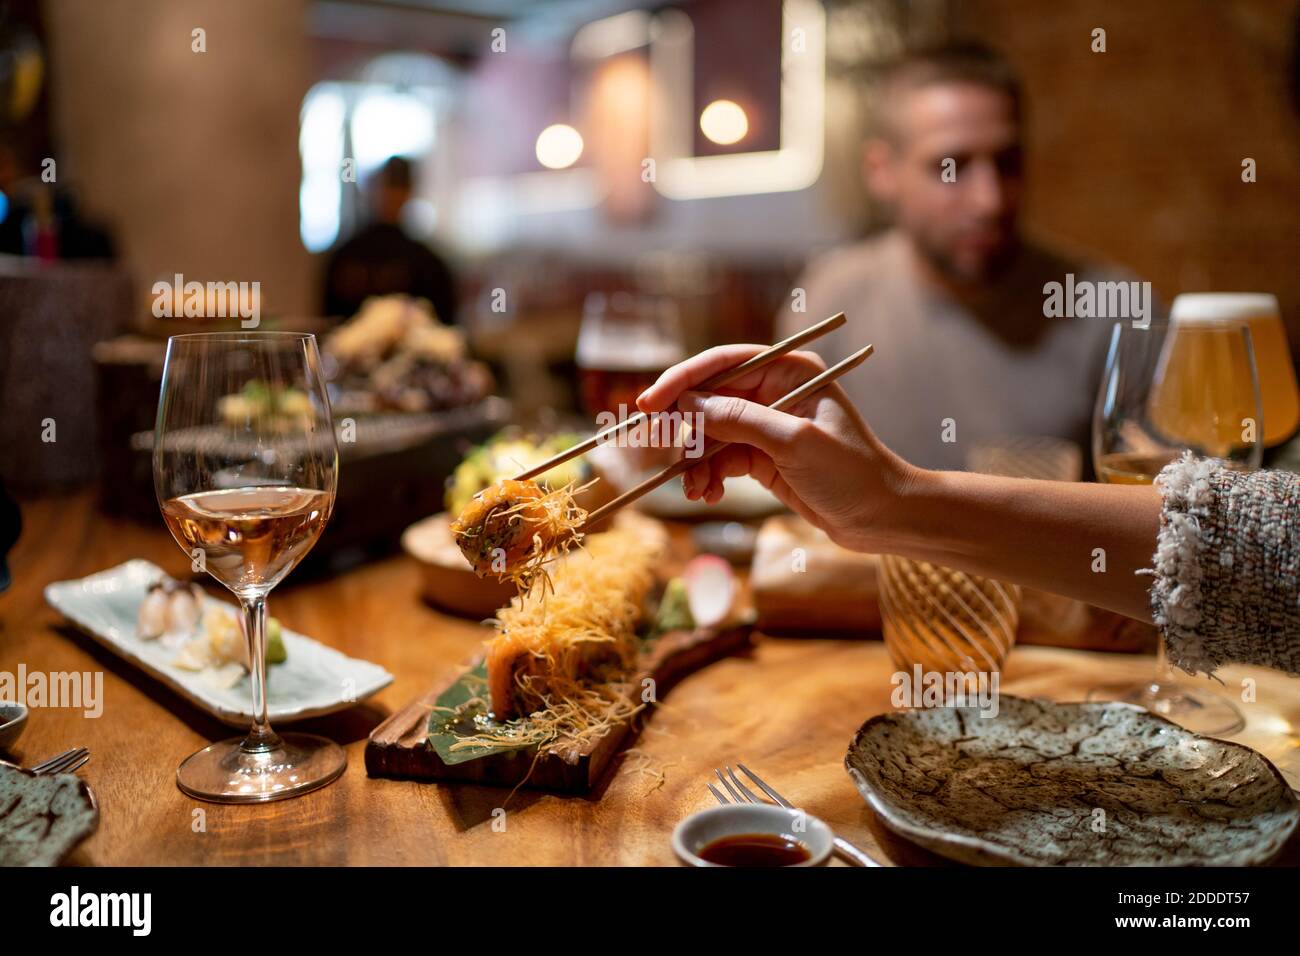 Woman using chopstick for picking up food with man sitting in background at restaurant Stock Photo